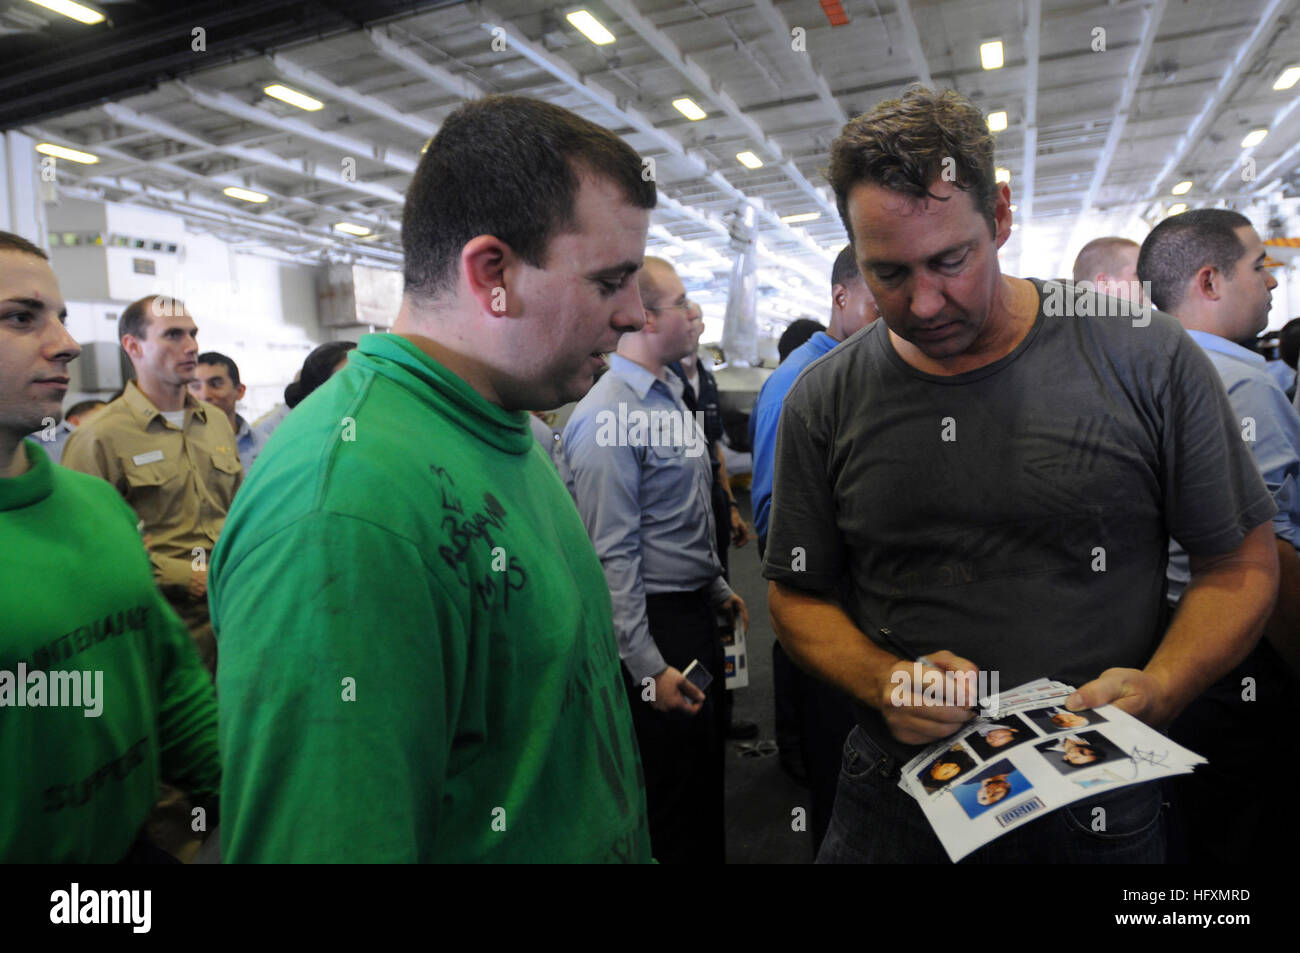 090713-N-2344B-111 GULF OF OMAN (July 13, 2009) Actor D.B. Sweeney signs autographs for Sailors in the hangar bay of the aircraft carrier USS Ronald Reagan (CVN 76). Sweeney visited Ronald Reagan with four other celebrities during the USO Summer Troop Visit. Ronald Reagan is deployed to the U.S. 5th Fleet area of responsibility. (U.S. Navy photo by Mass Communication Specialist 3rd Class Briana C. Brotzman/Released) US Navy 090713-N-2344B-111 Actor D.B. Sweeney signs autographs for Sailors in the hangar bay of the aircraft carrier USS Ronald Reagan (CVN 76) Stock Photo